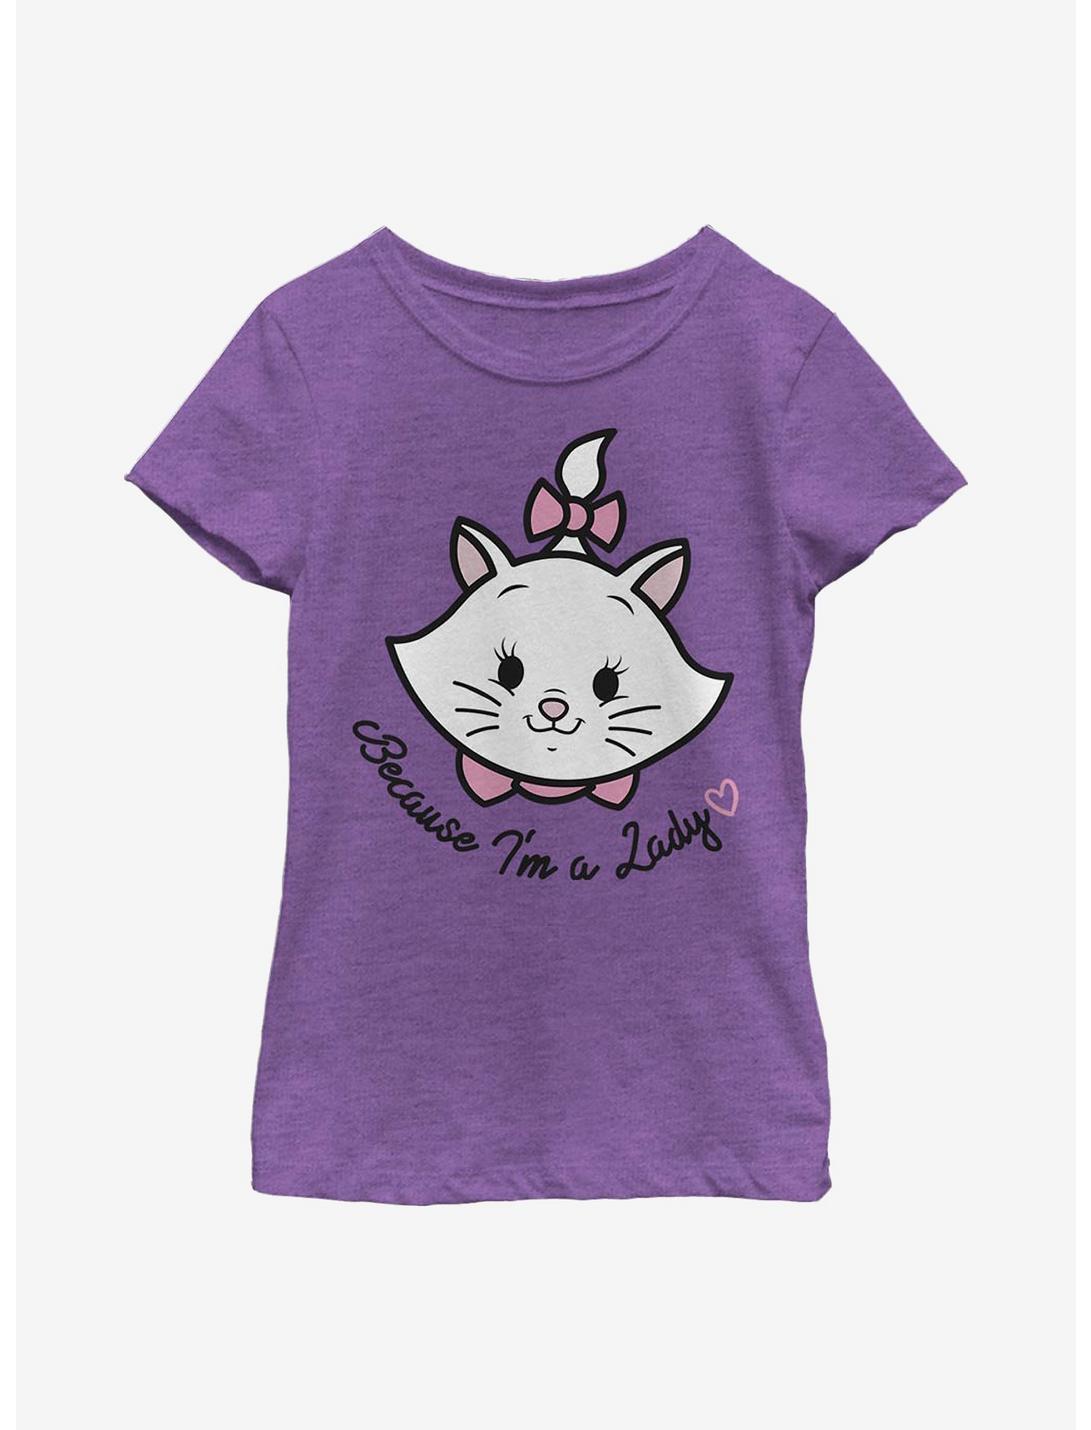 Disney The Aristocats Lady Faux Pocket Youth Girls T-Shirt, PURPLE BERRY, hi-res